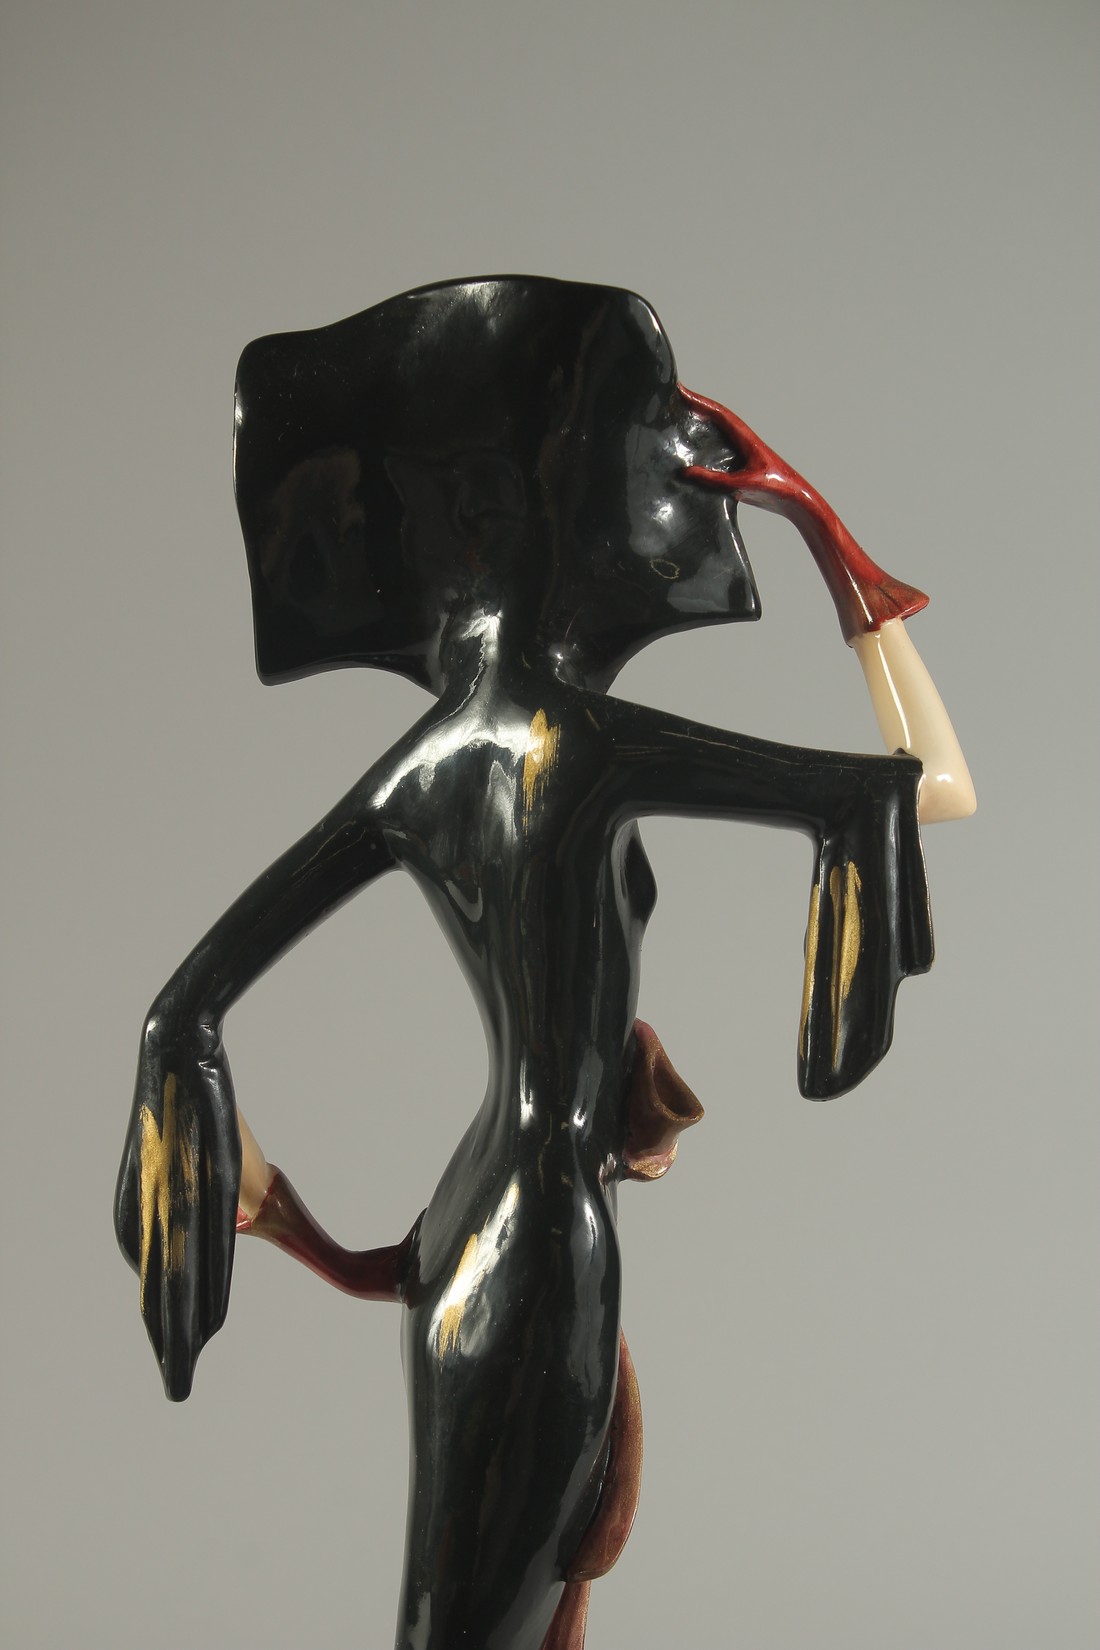 AMILCARE SANTINI (1910 - 1973) ITALIAN. AN ART DECO PORCELAIN LADY in a black dress. 17ins high. - Image 6 of 9